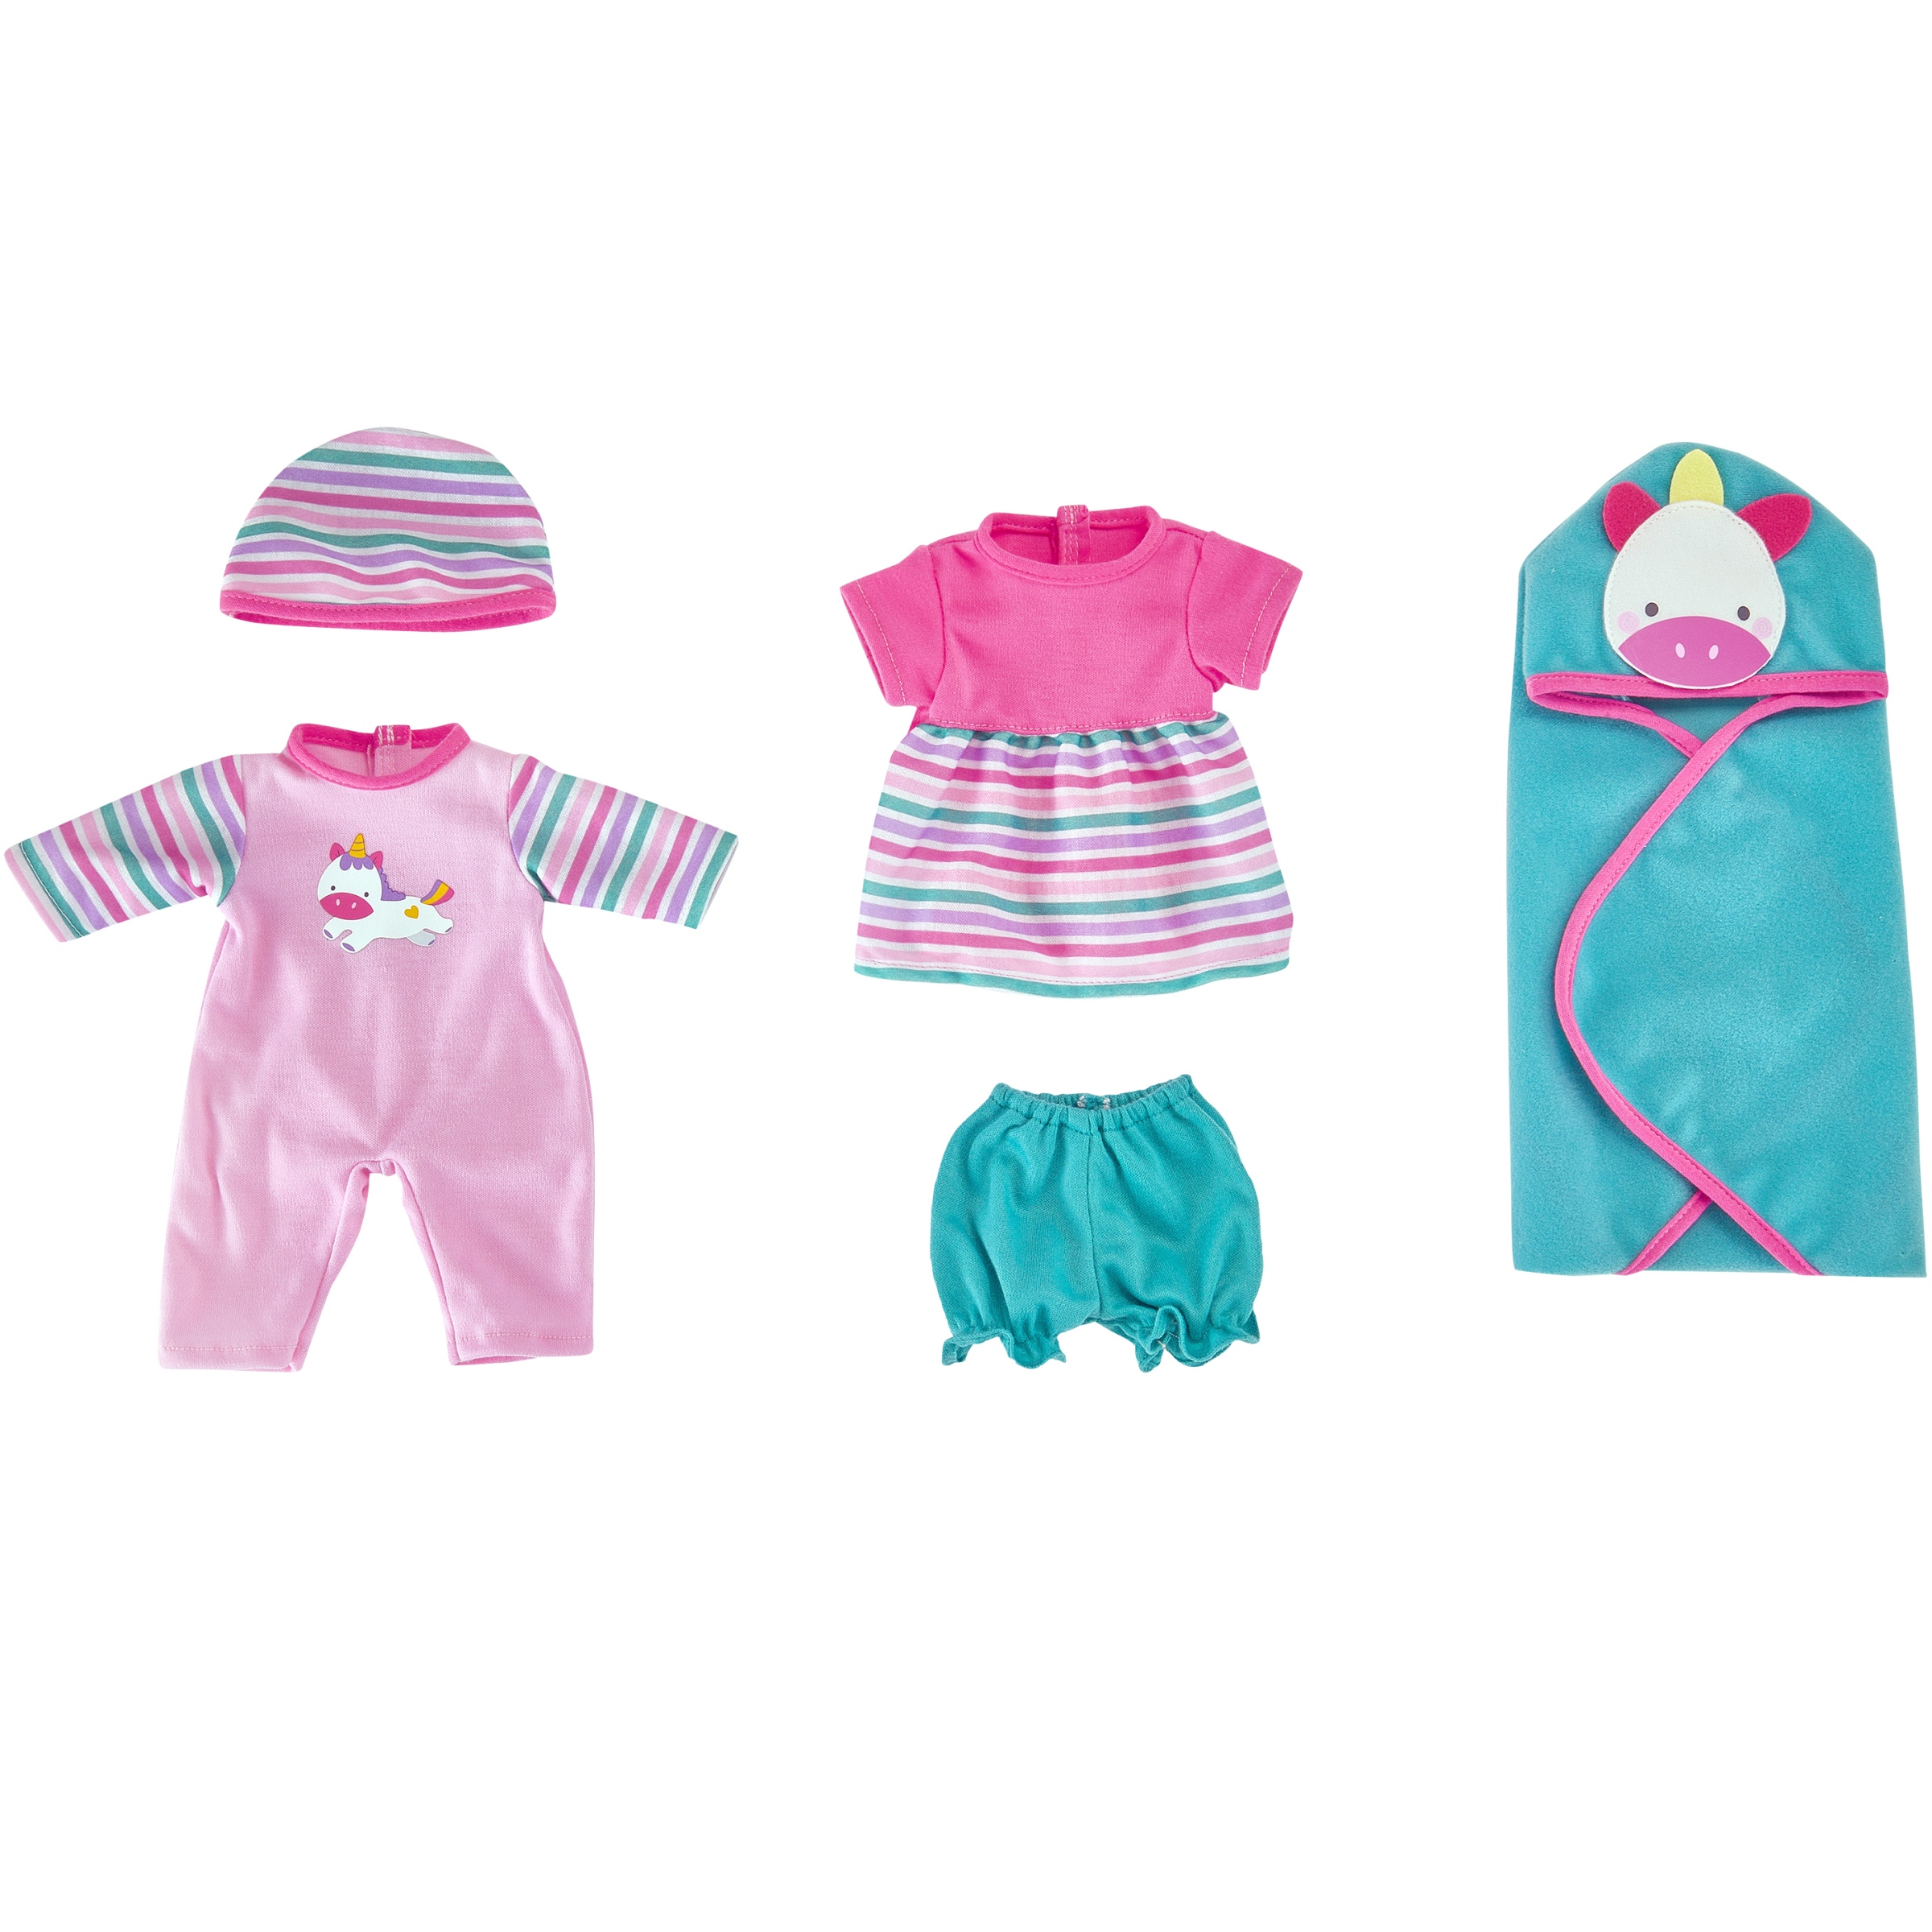 My Sweet Love 12.5" Baby Doll and Outfits Play Set, 6 Pieces, Unicorn - image 2 of 5